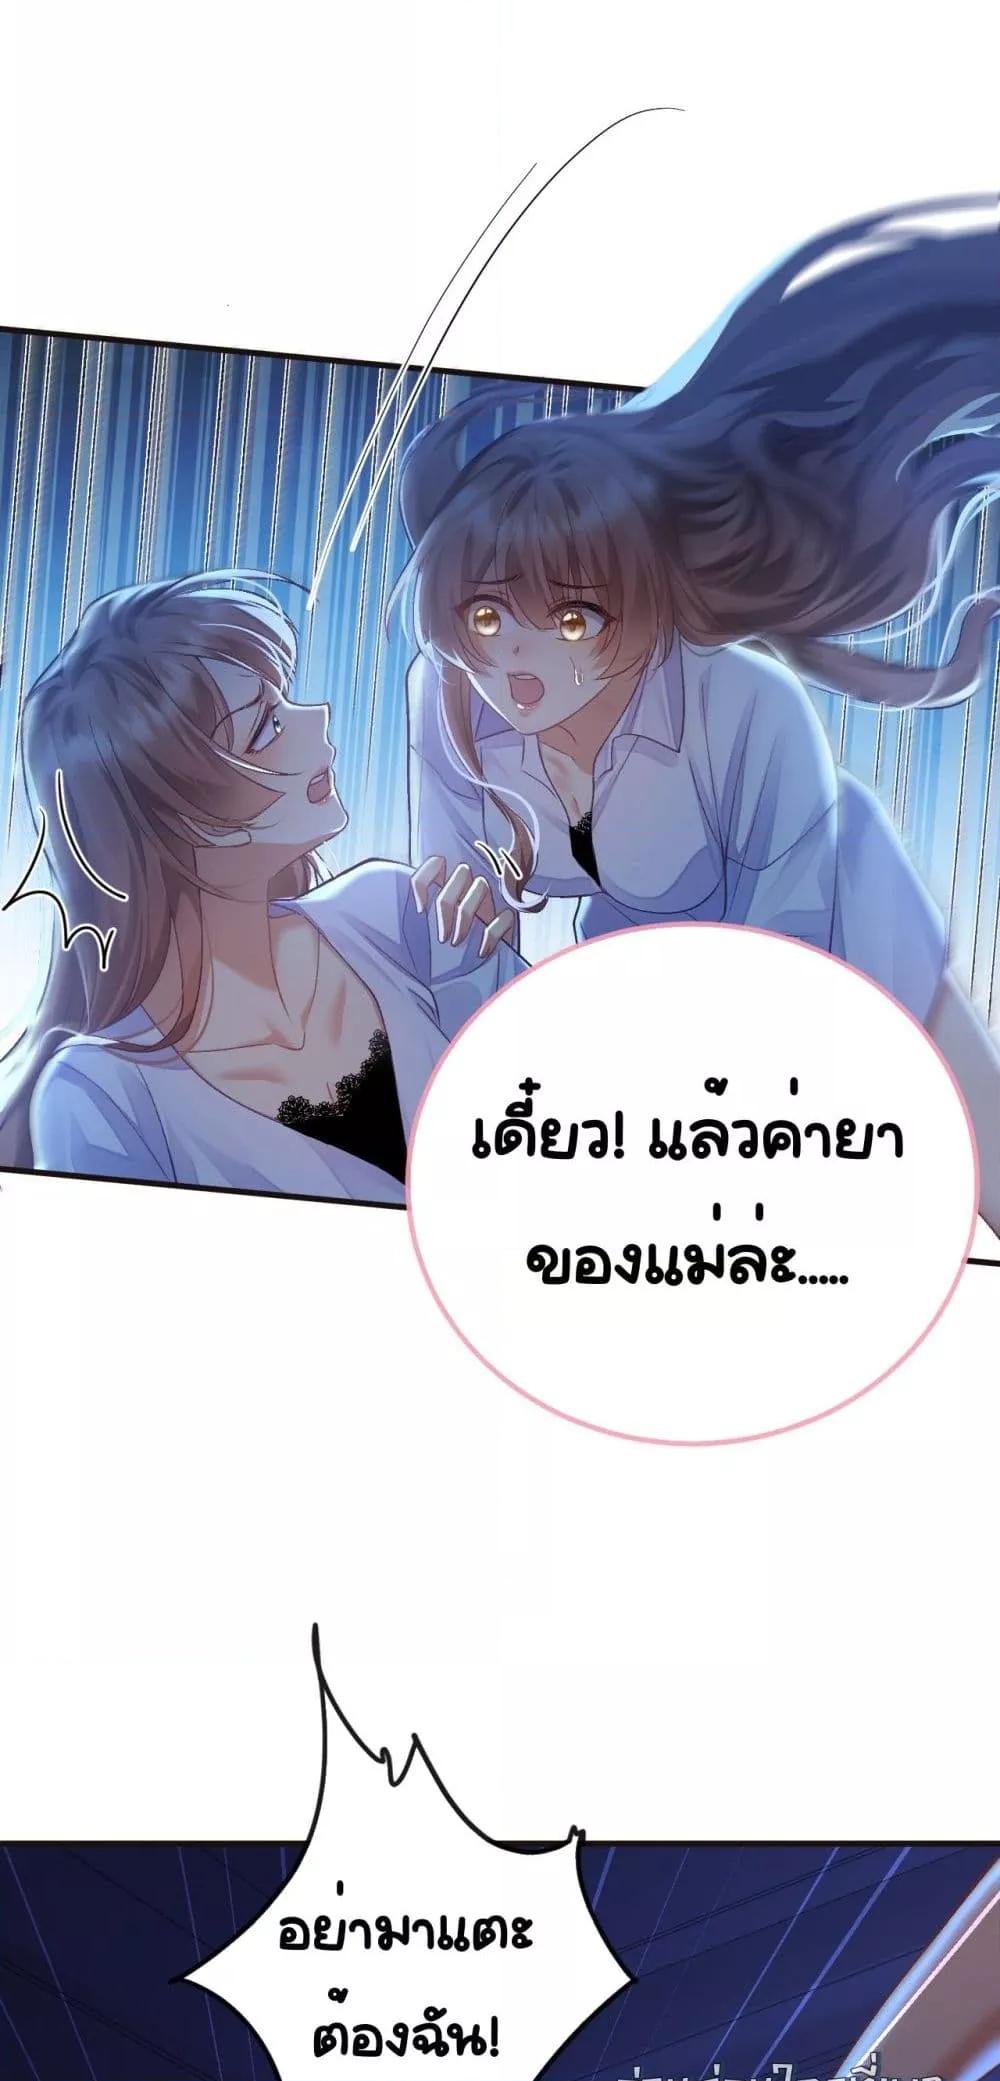 Madam! She Wants to Escape Every Day – มาดาม! ตอนที่ 1 (19)